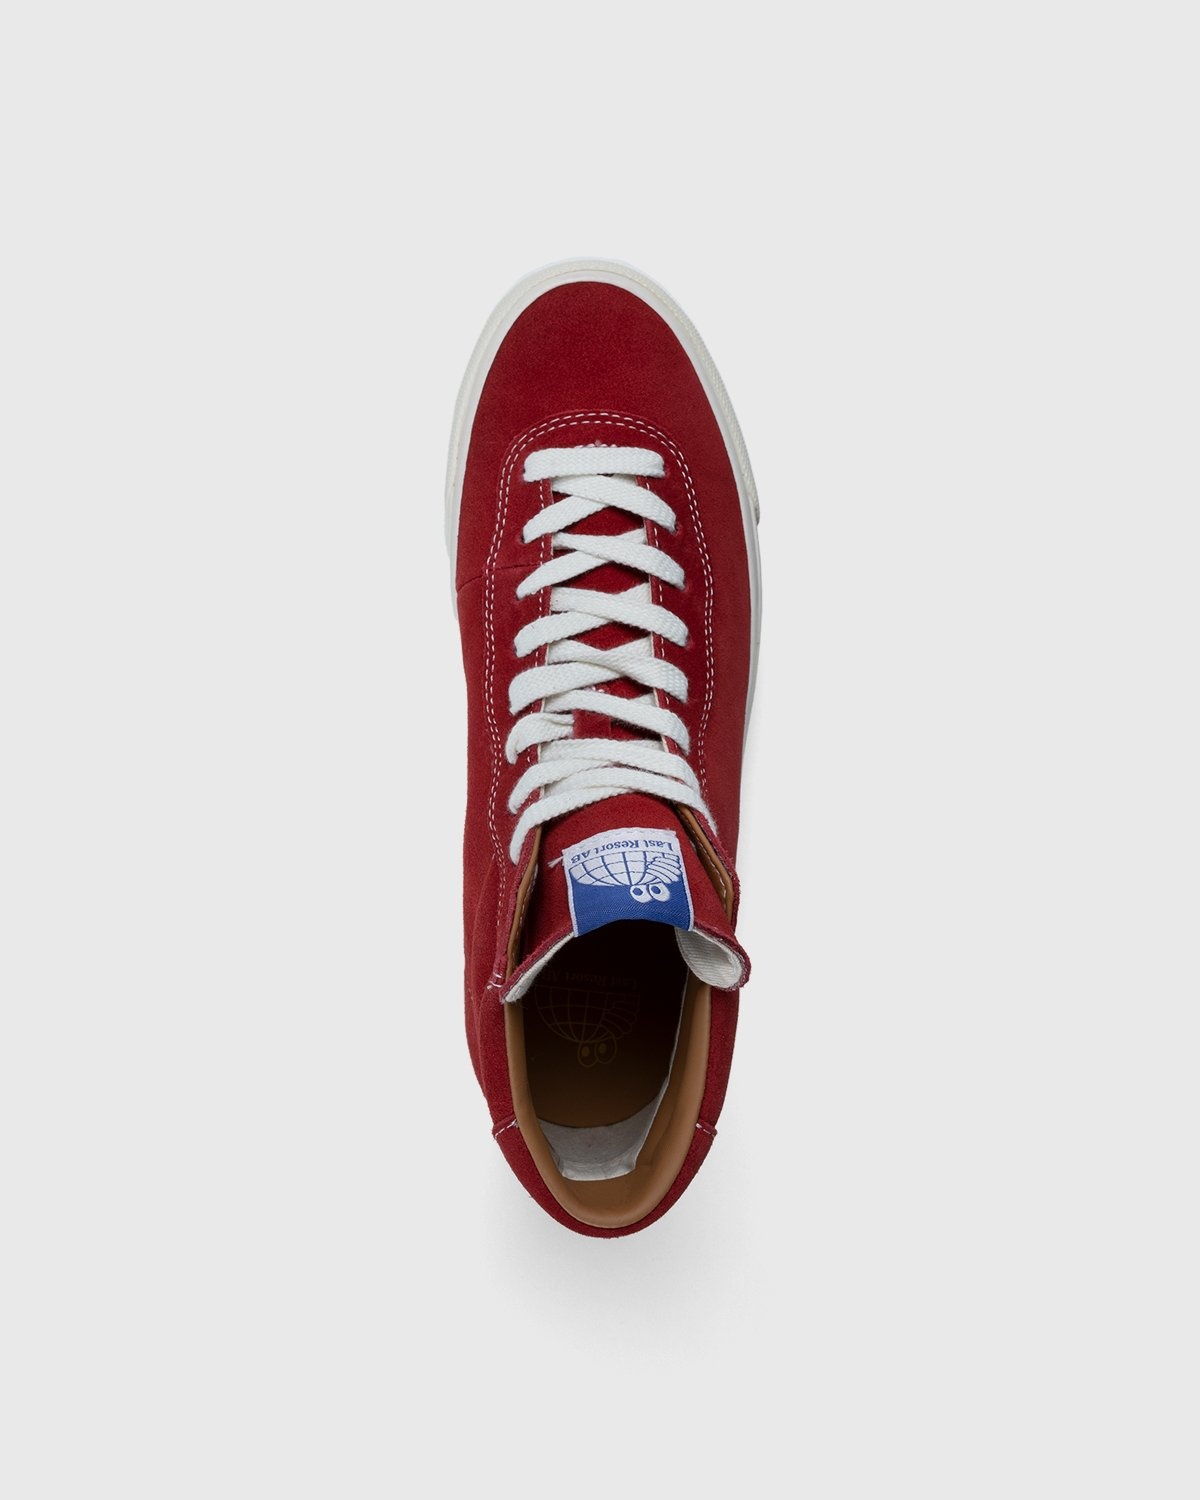 Last Resort AB – VM001 Hi Suede Old Red/White - High Top Sneakers - Red - Image 5